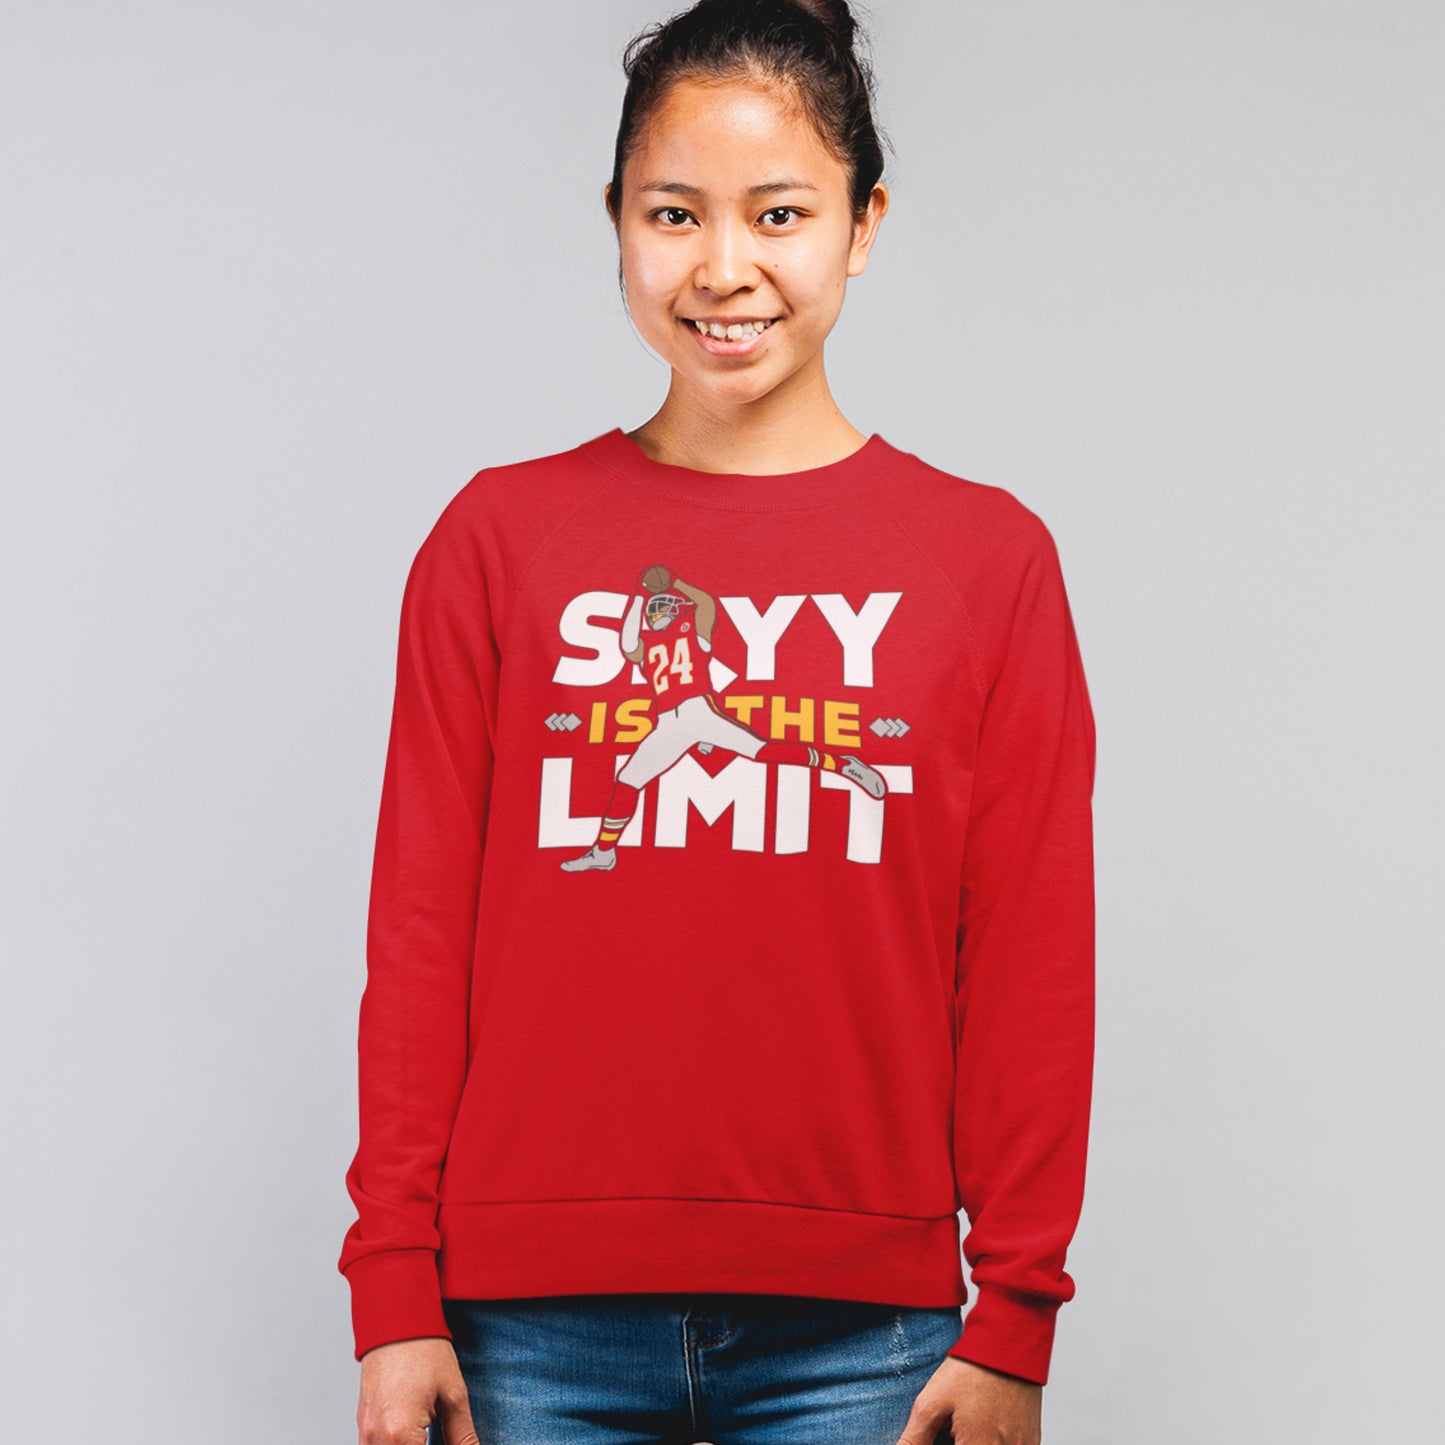 KC Swag Kansas City Chiefs White & Gold Skyy Is The Limit (with football player) on a Red Crewneck Sweatshirt worn by a smiling female model standing in front of a gray studio wall